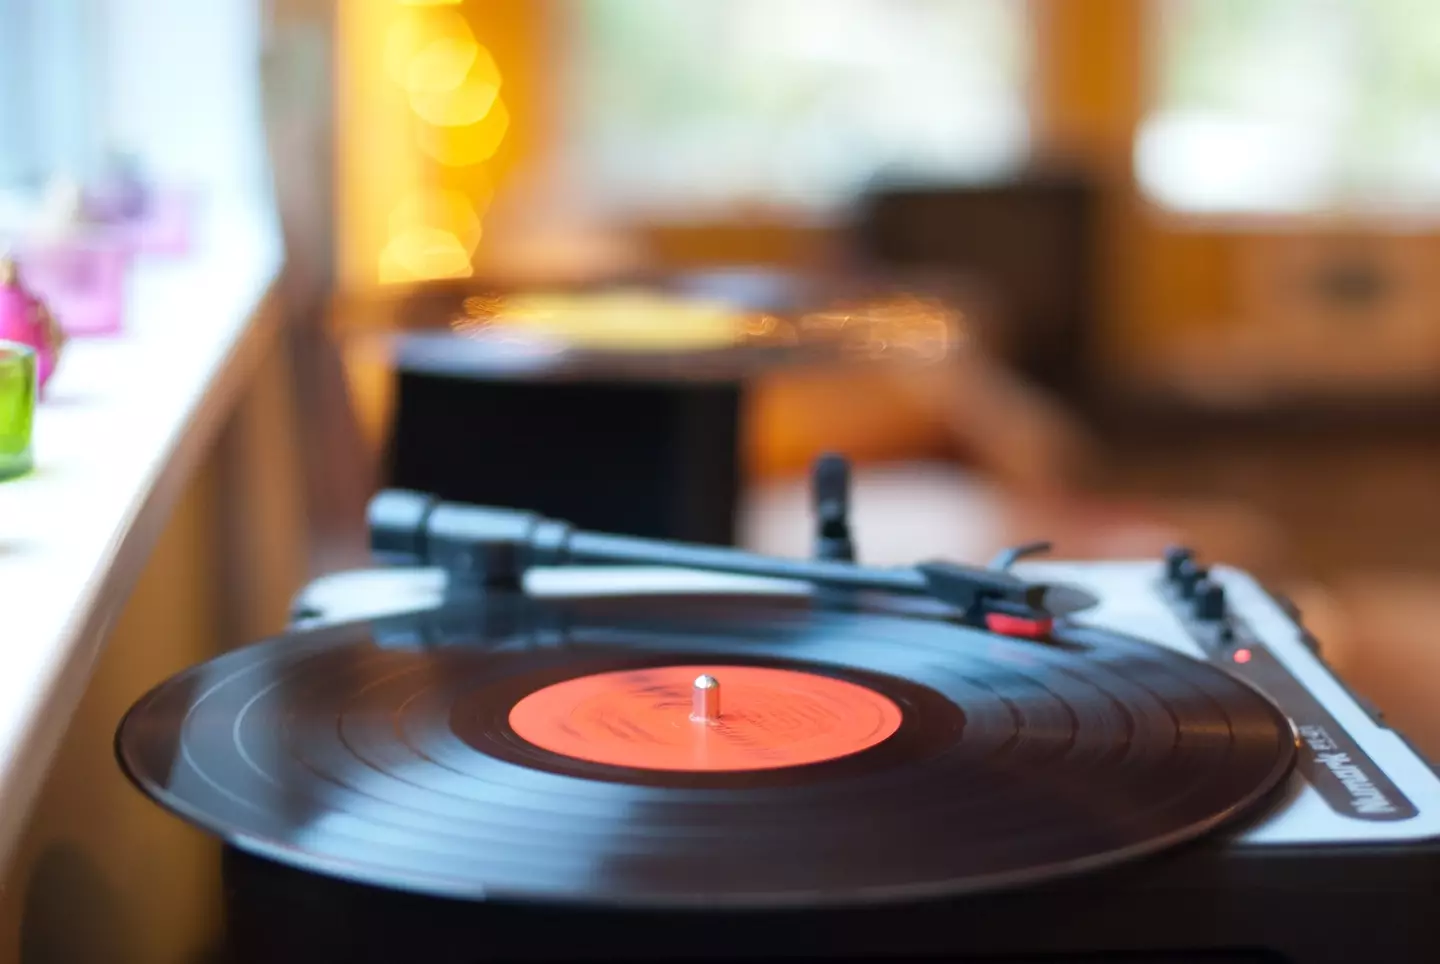 We have less time to discover music as we gain responsibilities. (Getty stock image)